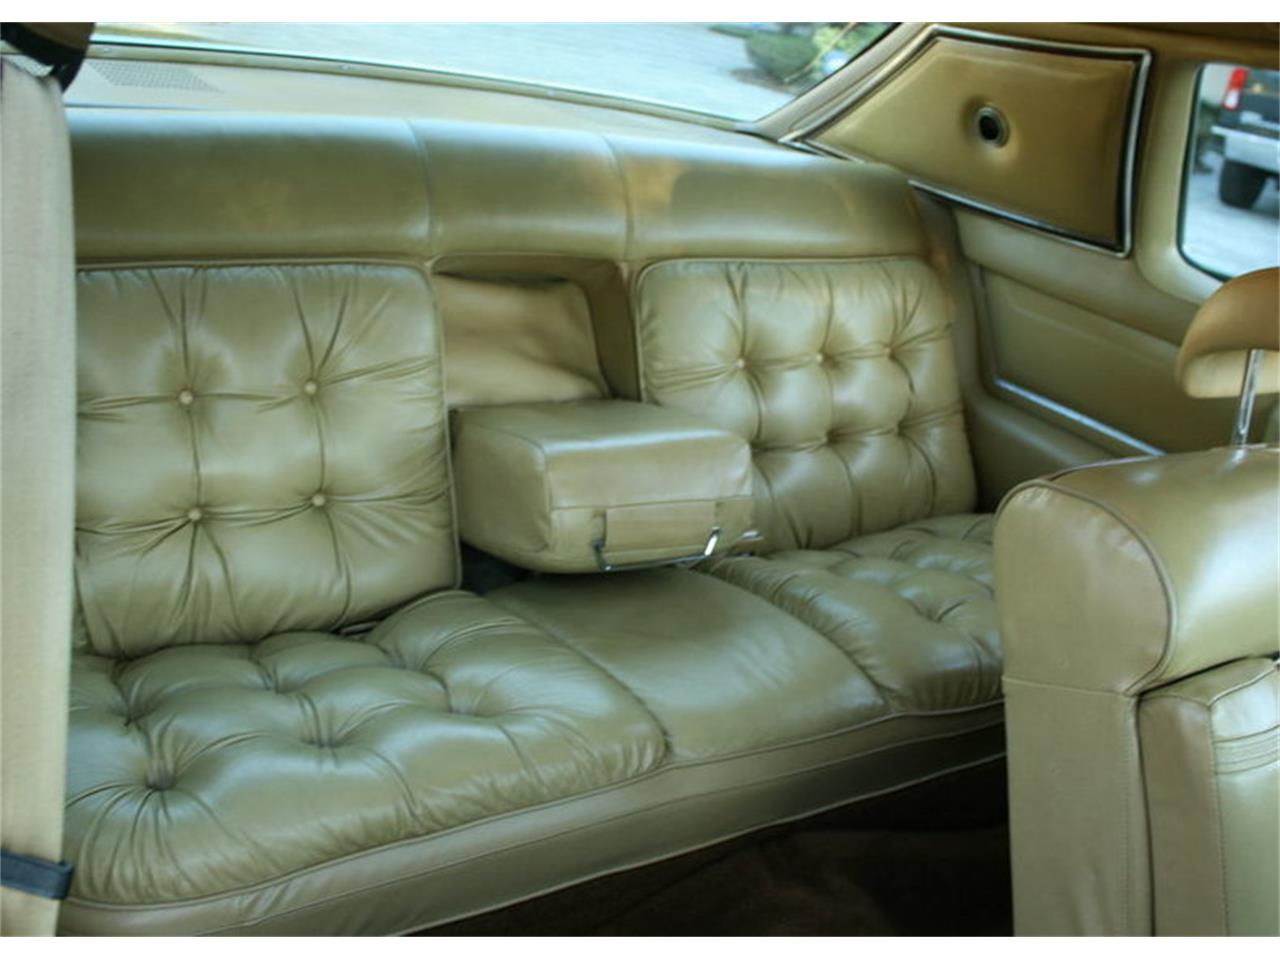 1975 Chrysler LeBaron Imperial Coupe for Sale | ClassicCars.com | CC ...